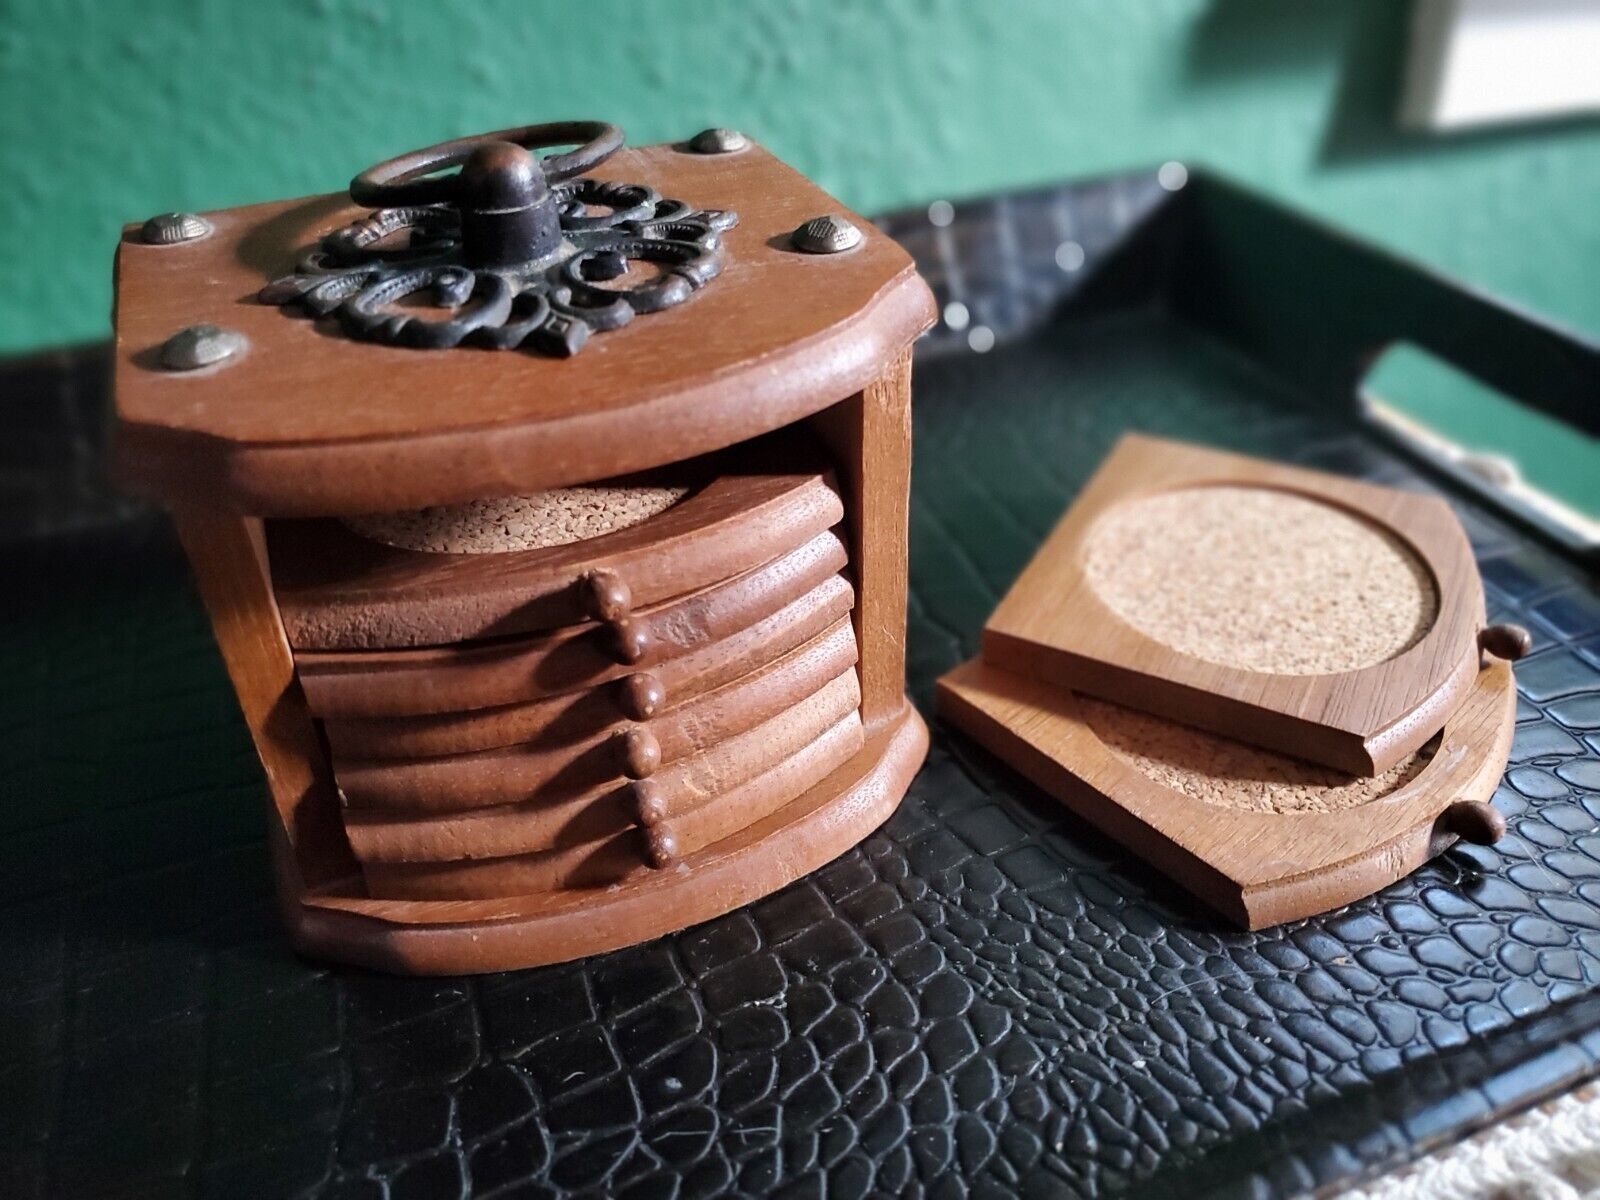 A wood holder containing cork coasters